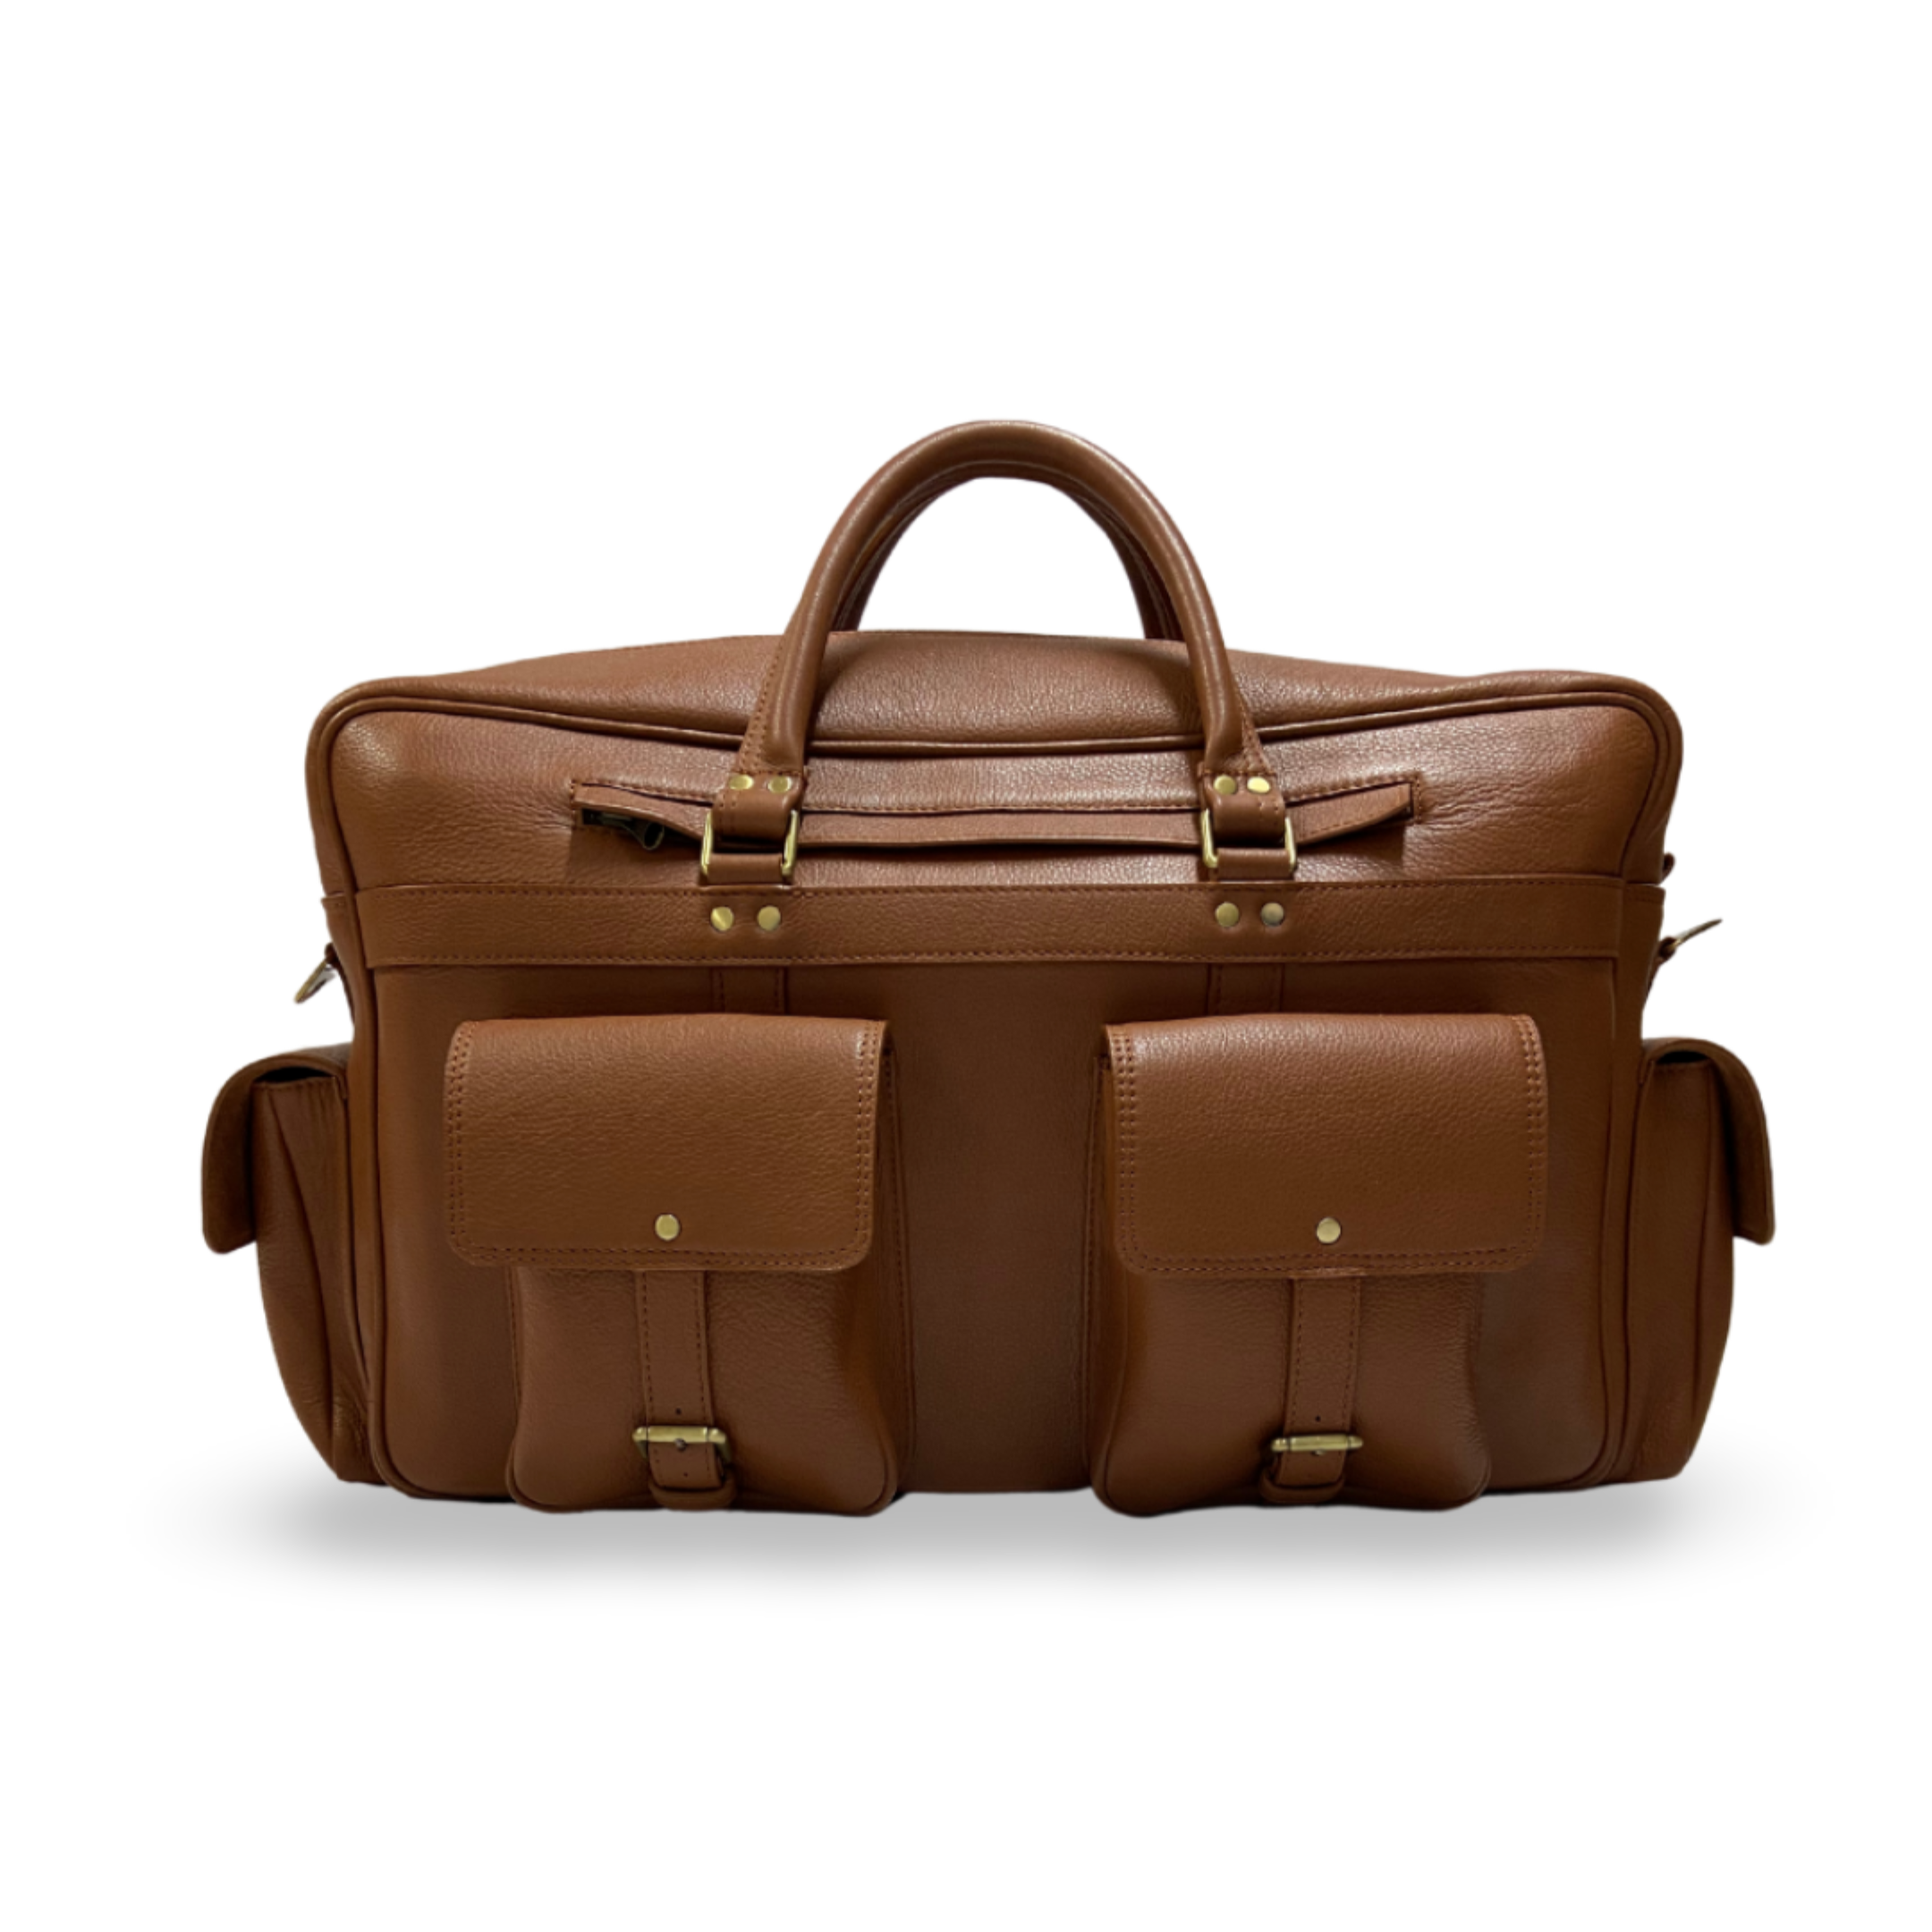 Brown Pebbled Leather Duffle Bag